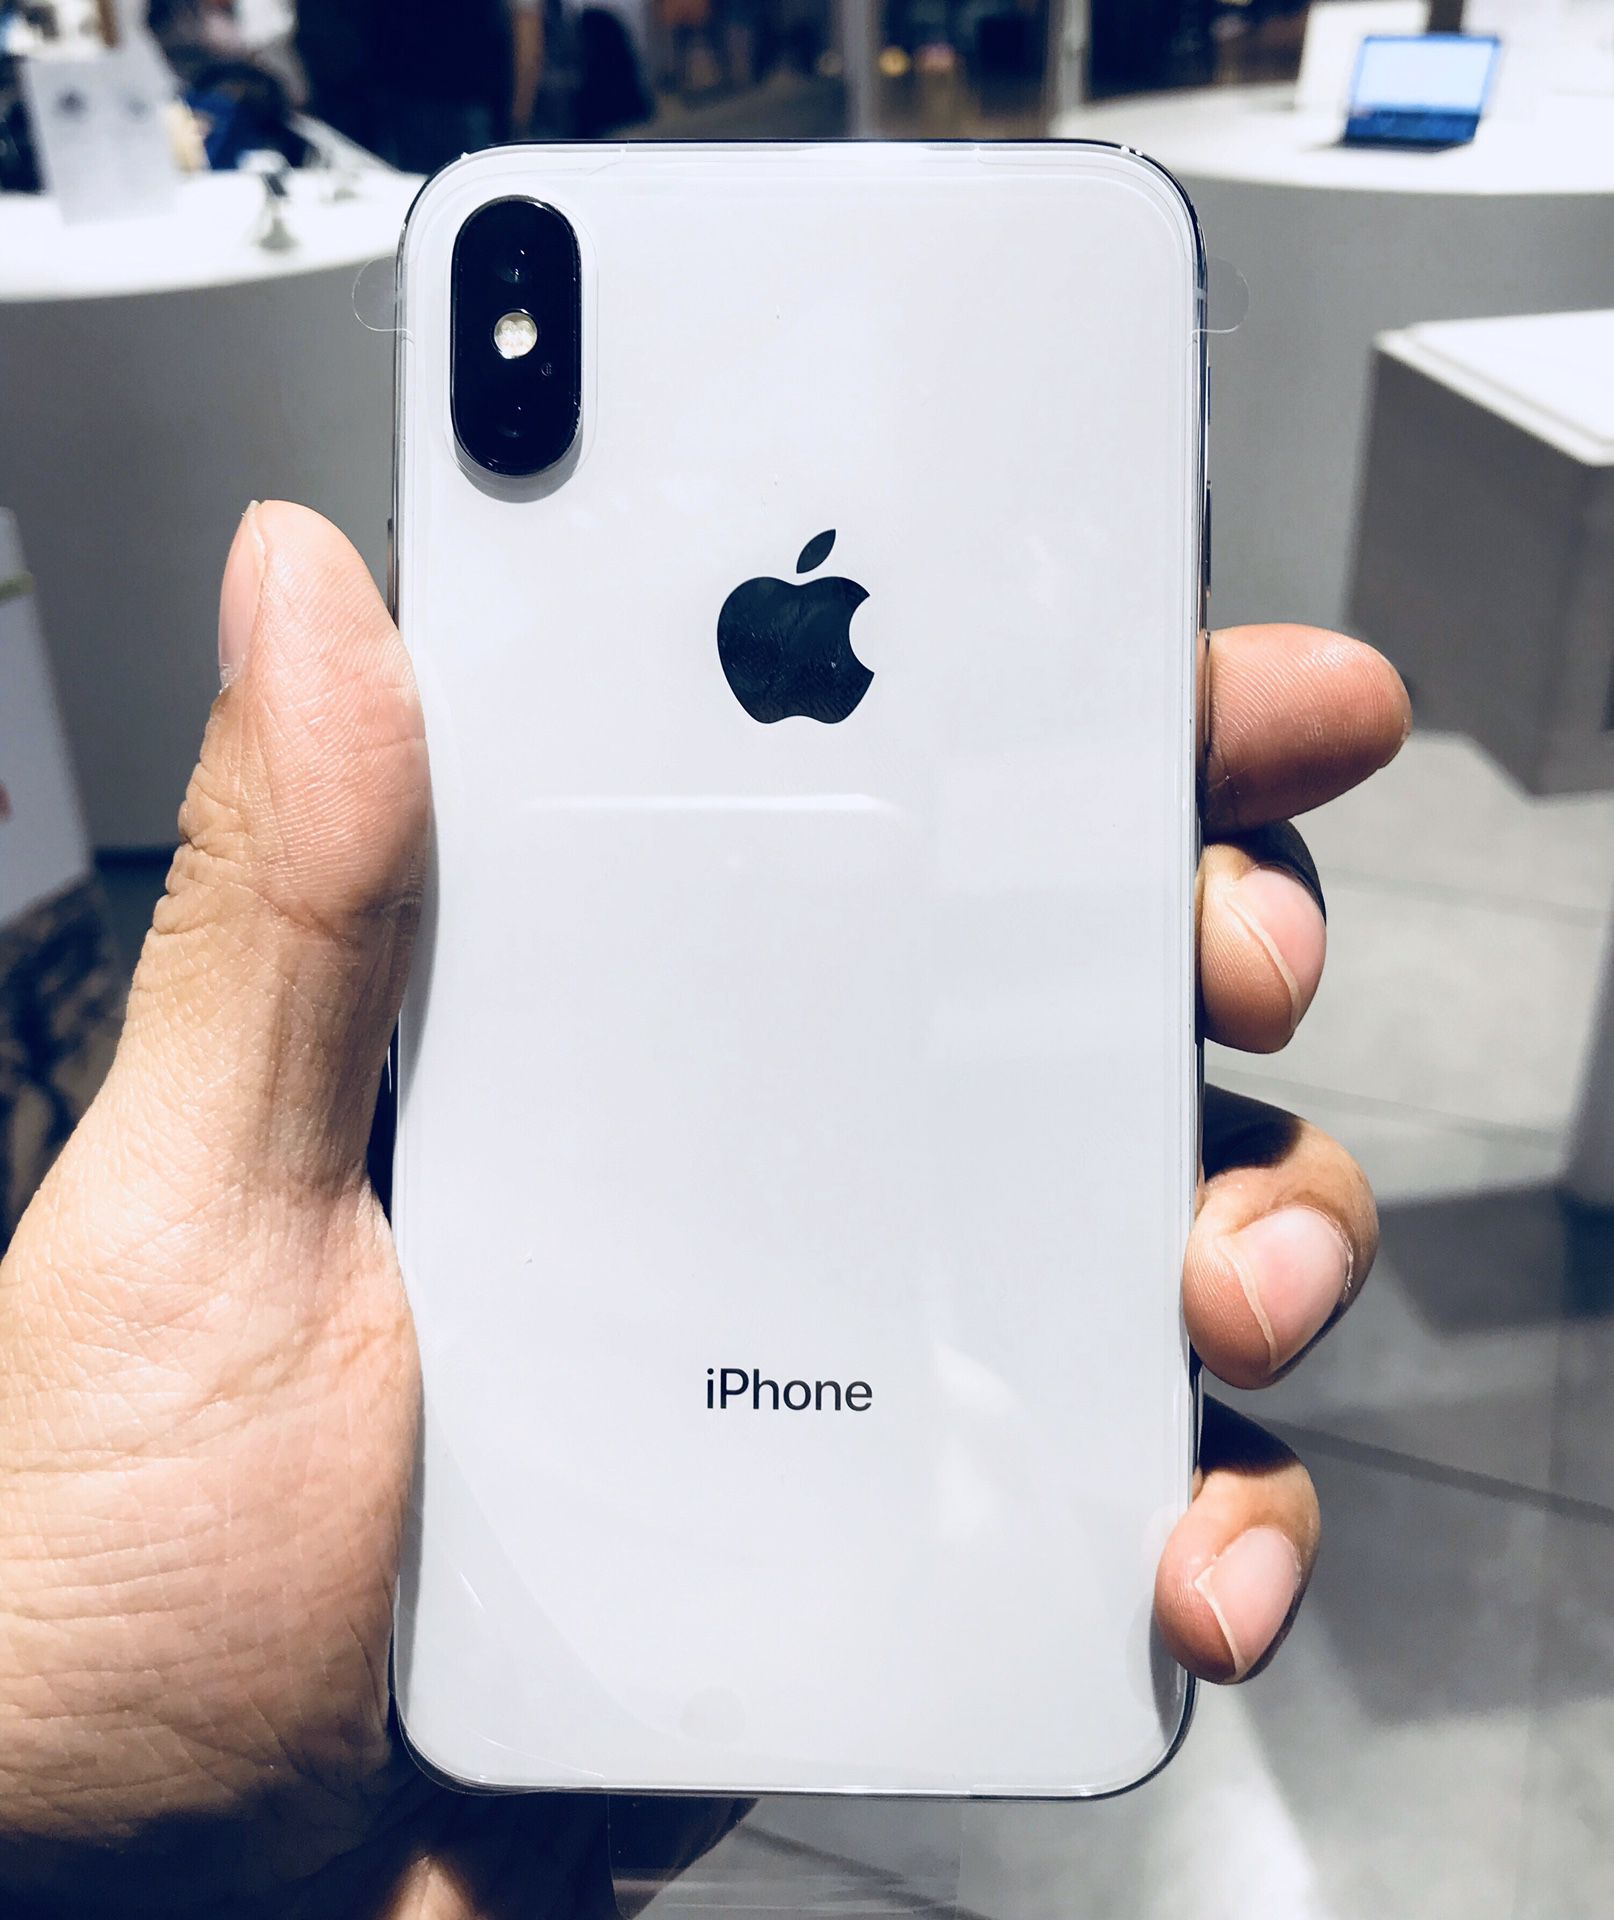 iPhone X Silver - unlocked for any carrier